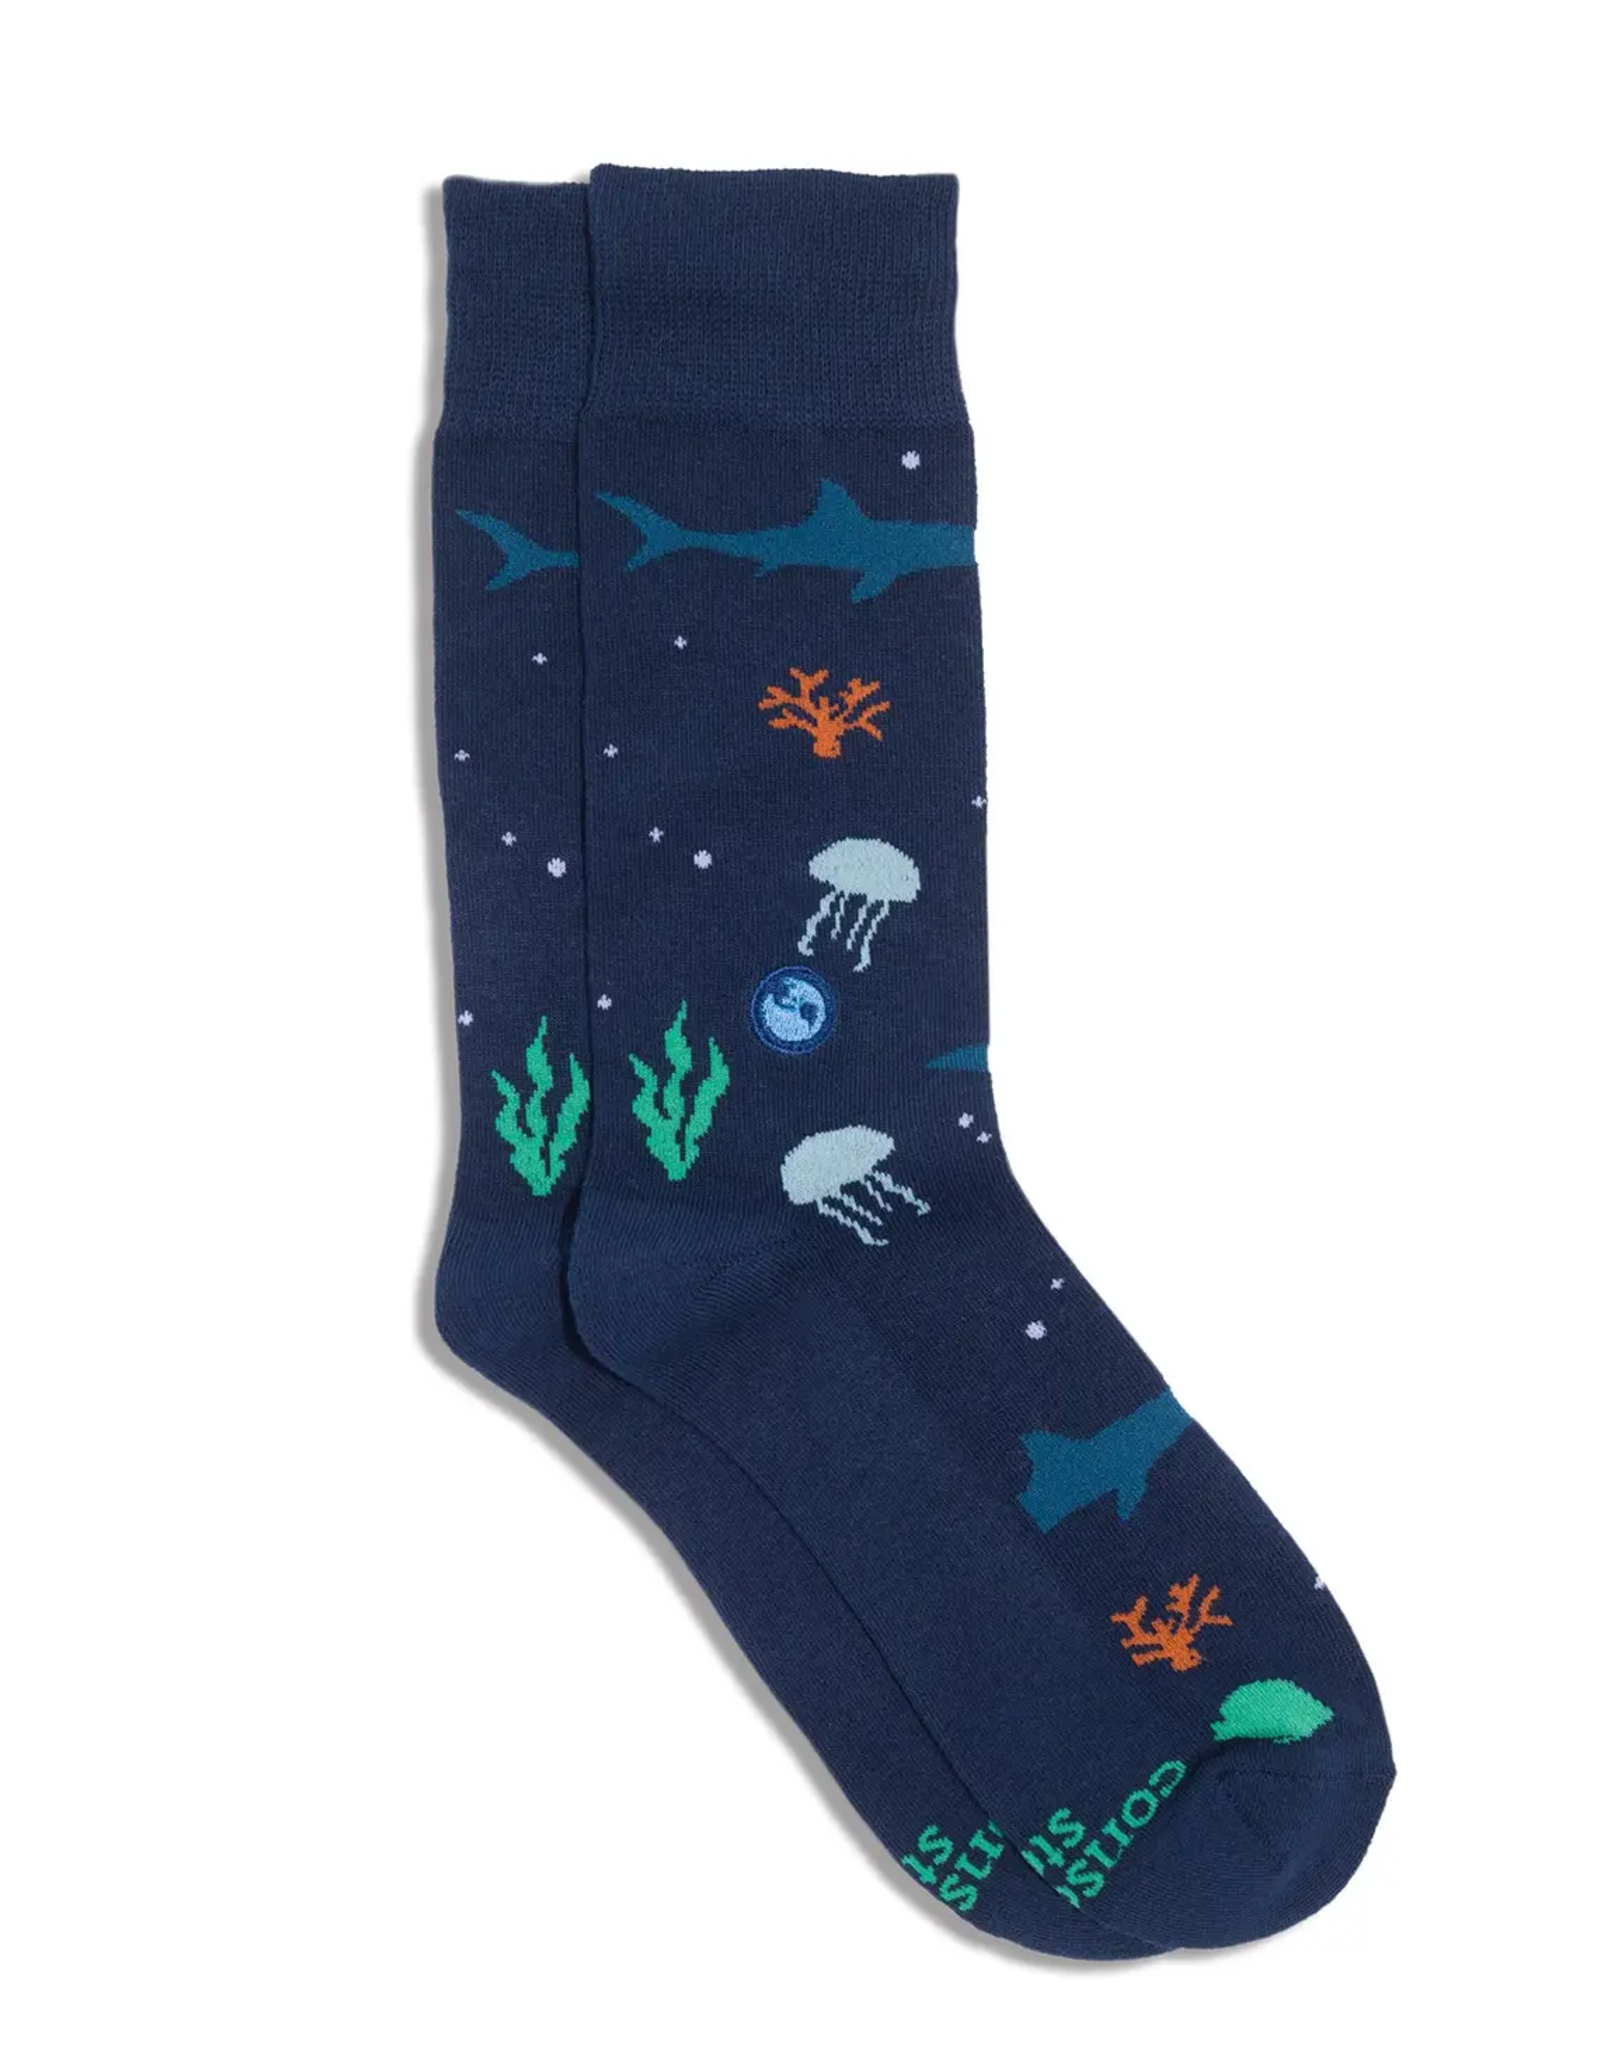 Conscious Step Socks that Protect Our Planet